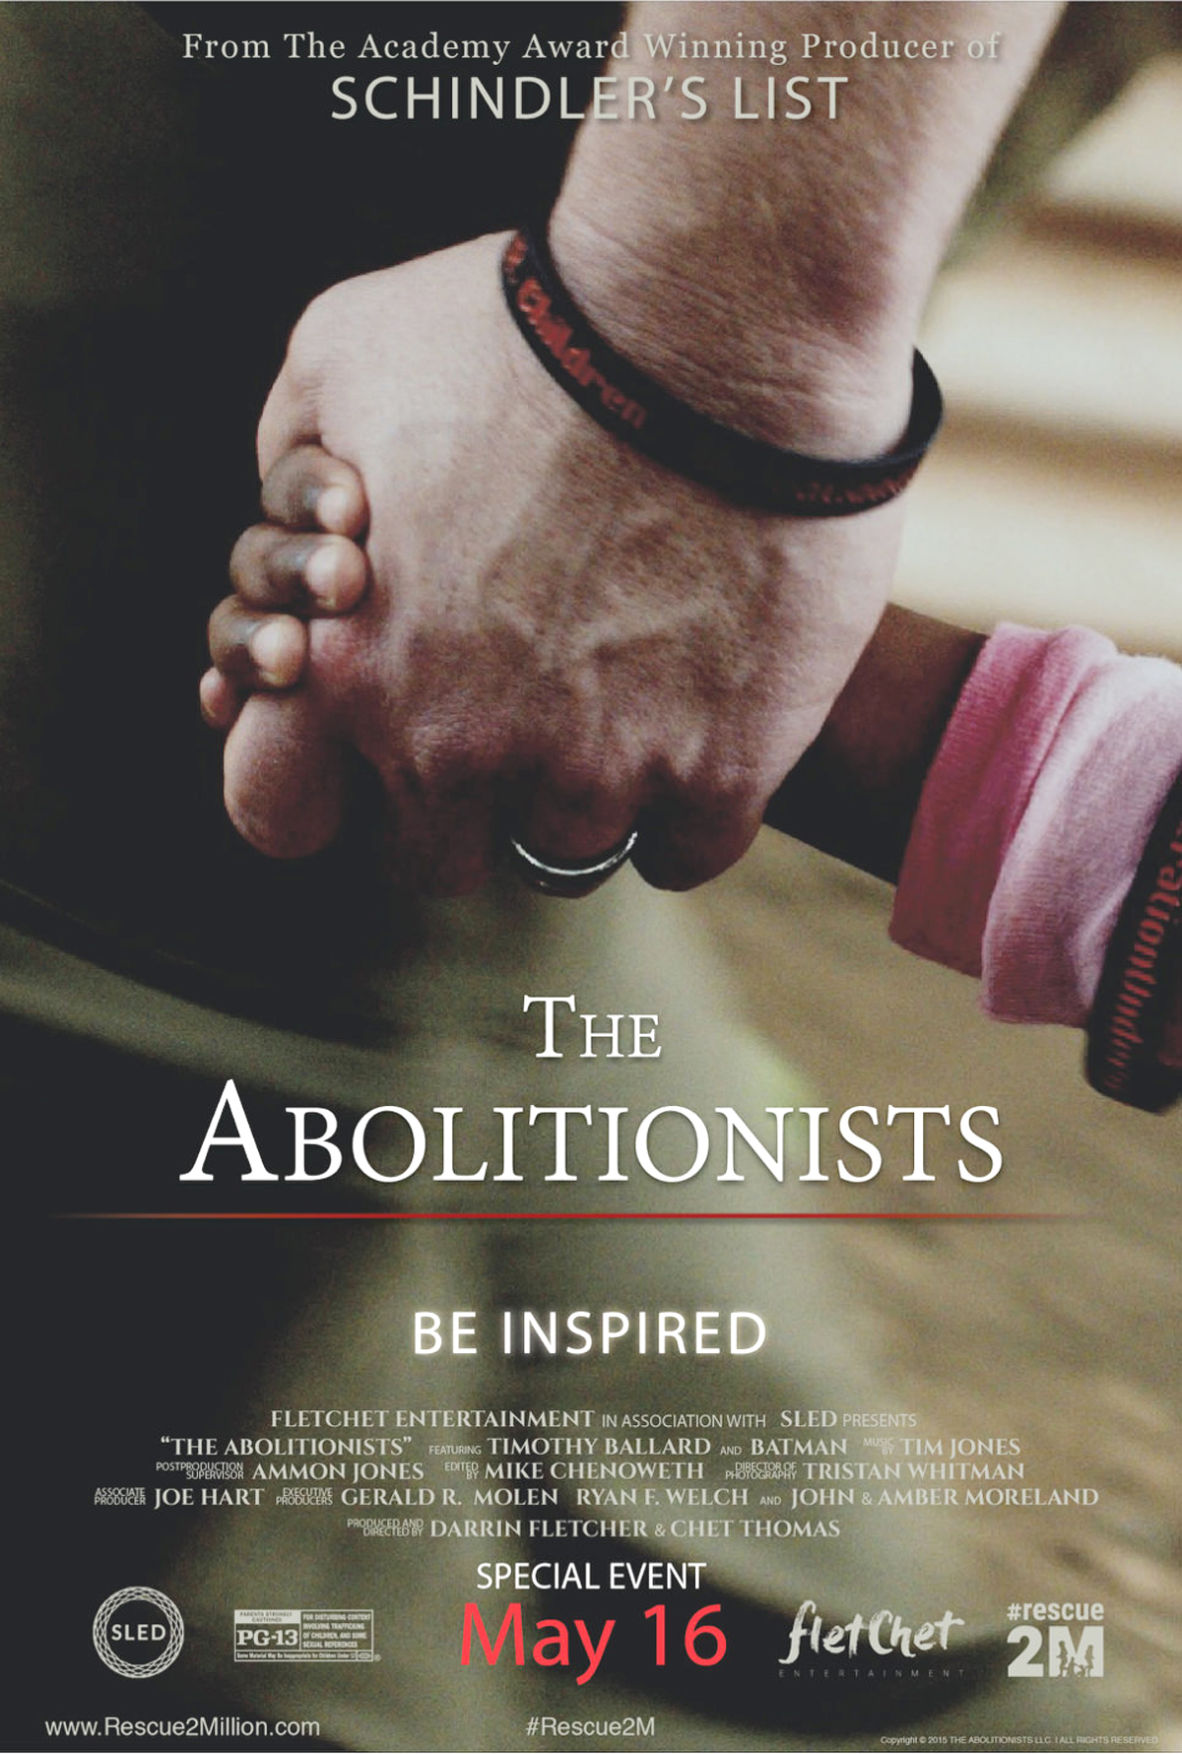 becoming an abolitionist